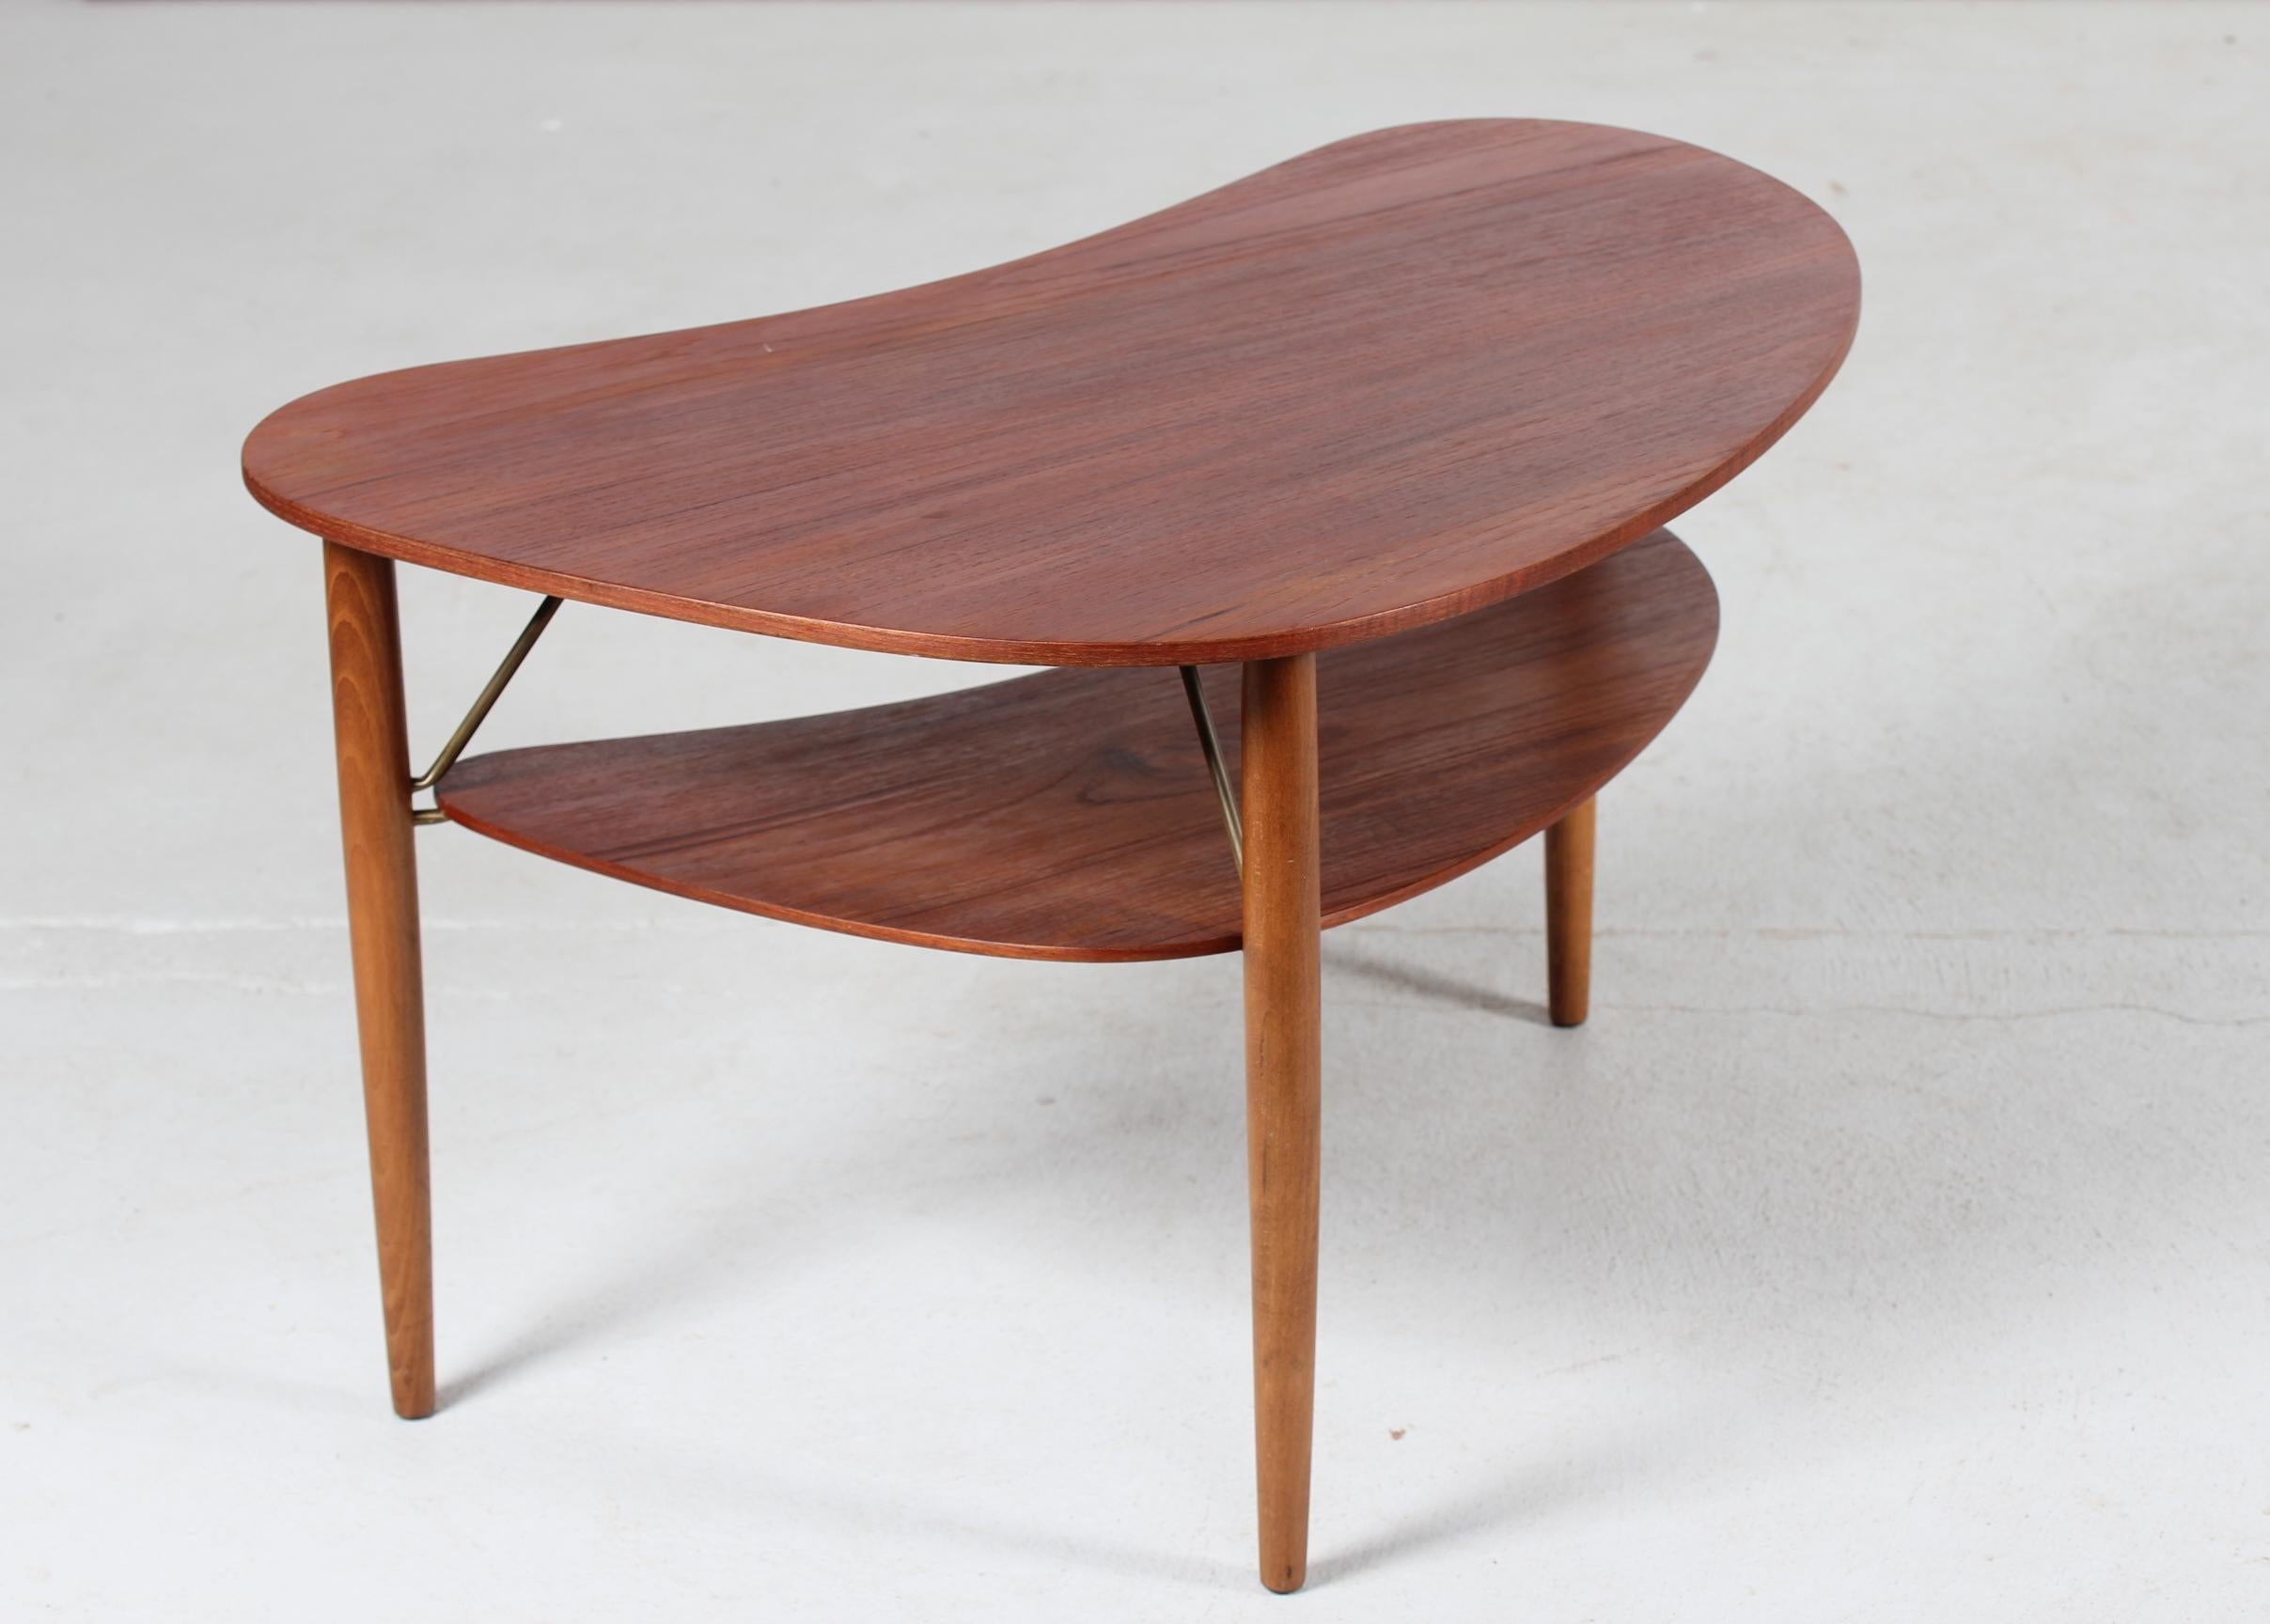 Danish modern organically shaped coffee table with shelf from the 1950´s, a
vintage table with a beautiful rounded shape. 
The table top is made of teak veneer and the round legs are made of solid beech. The fittings and slender table top